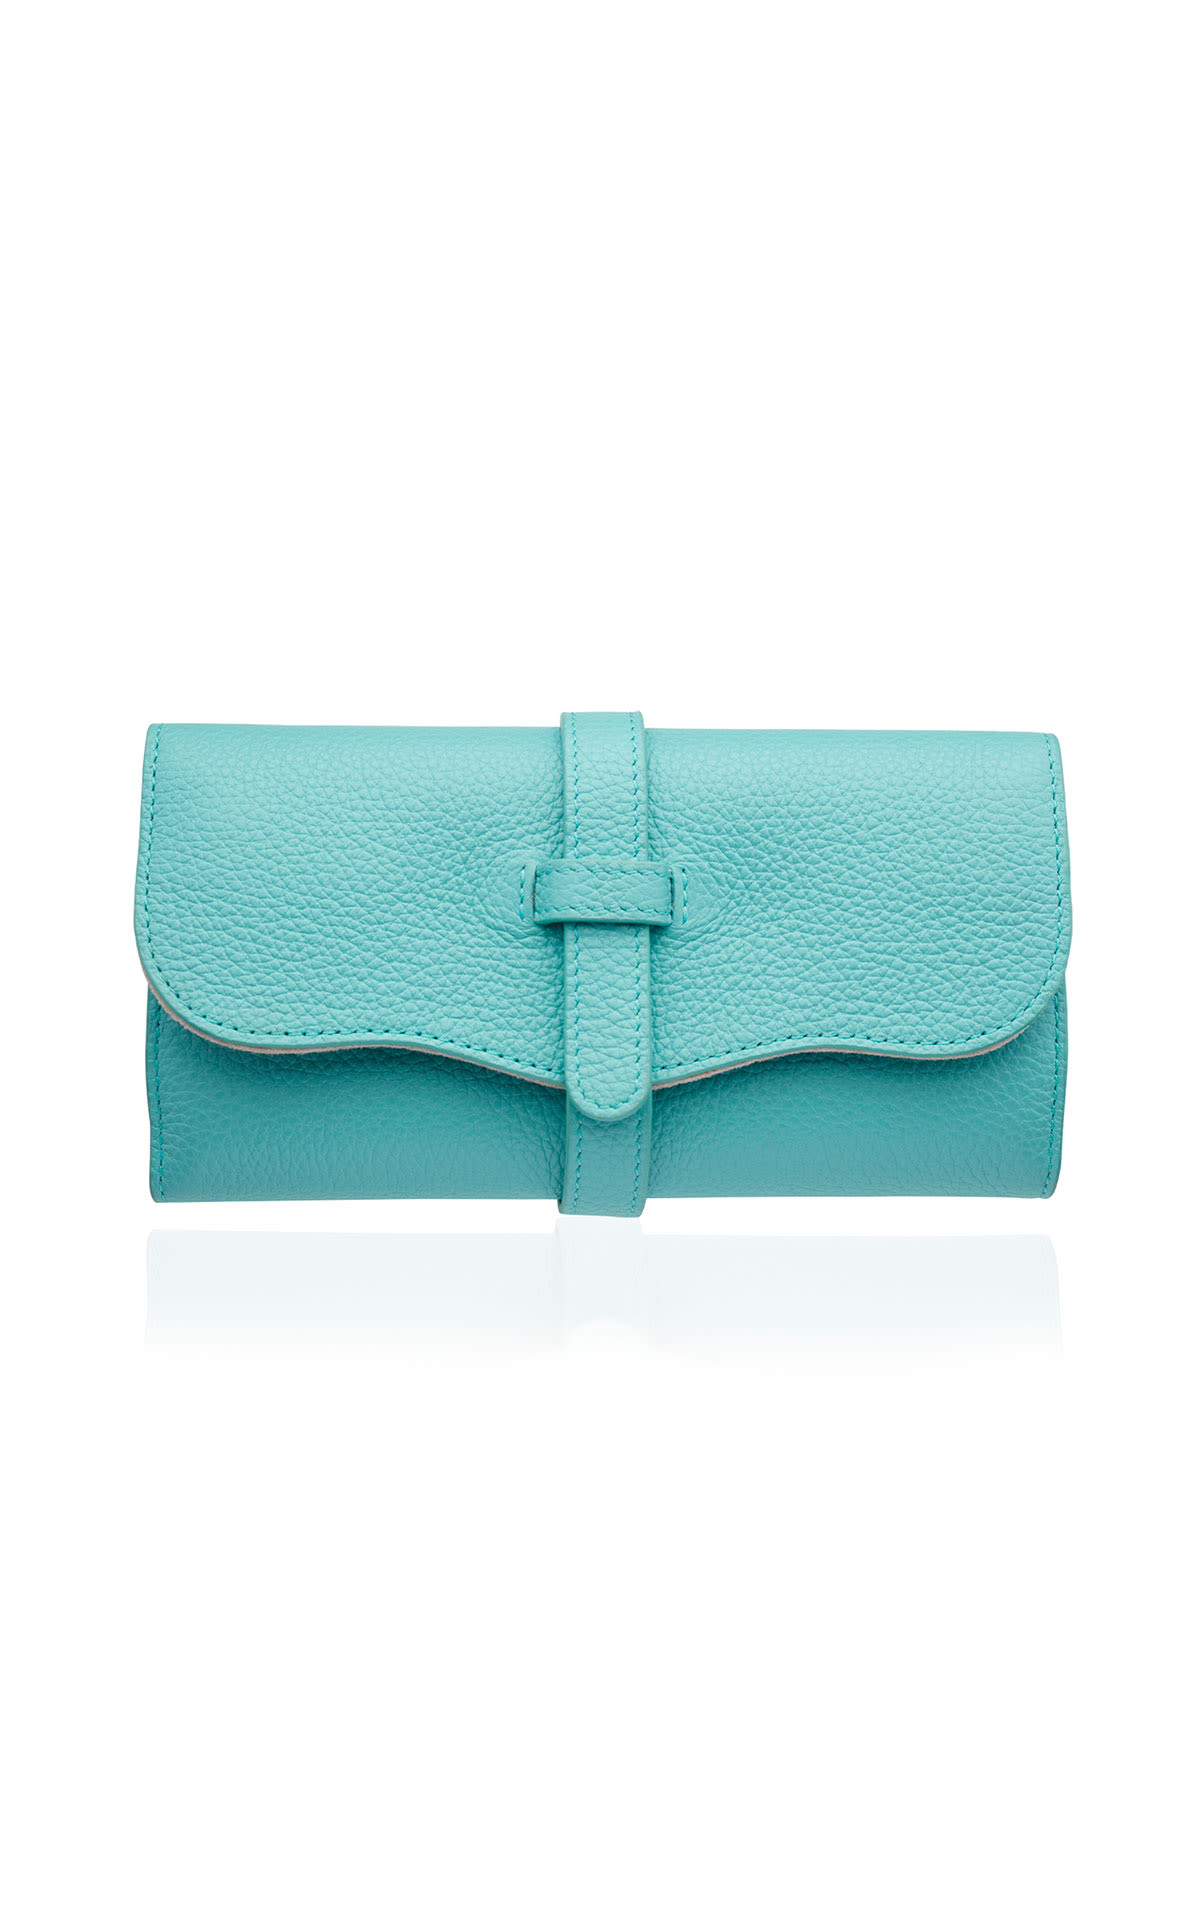 Monica Vinader Turquoise leather jewellery roll from Bicester Village